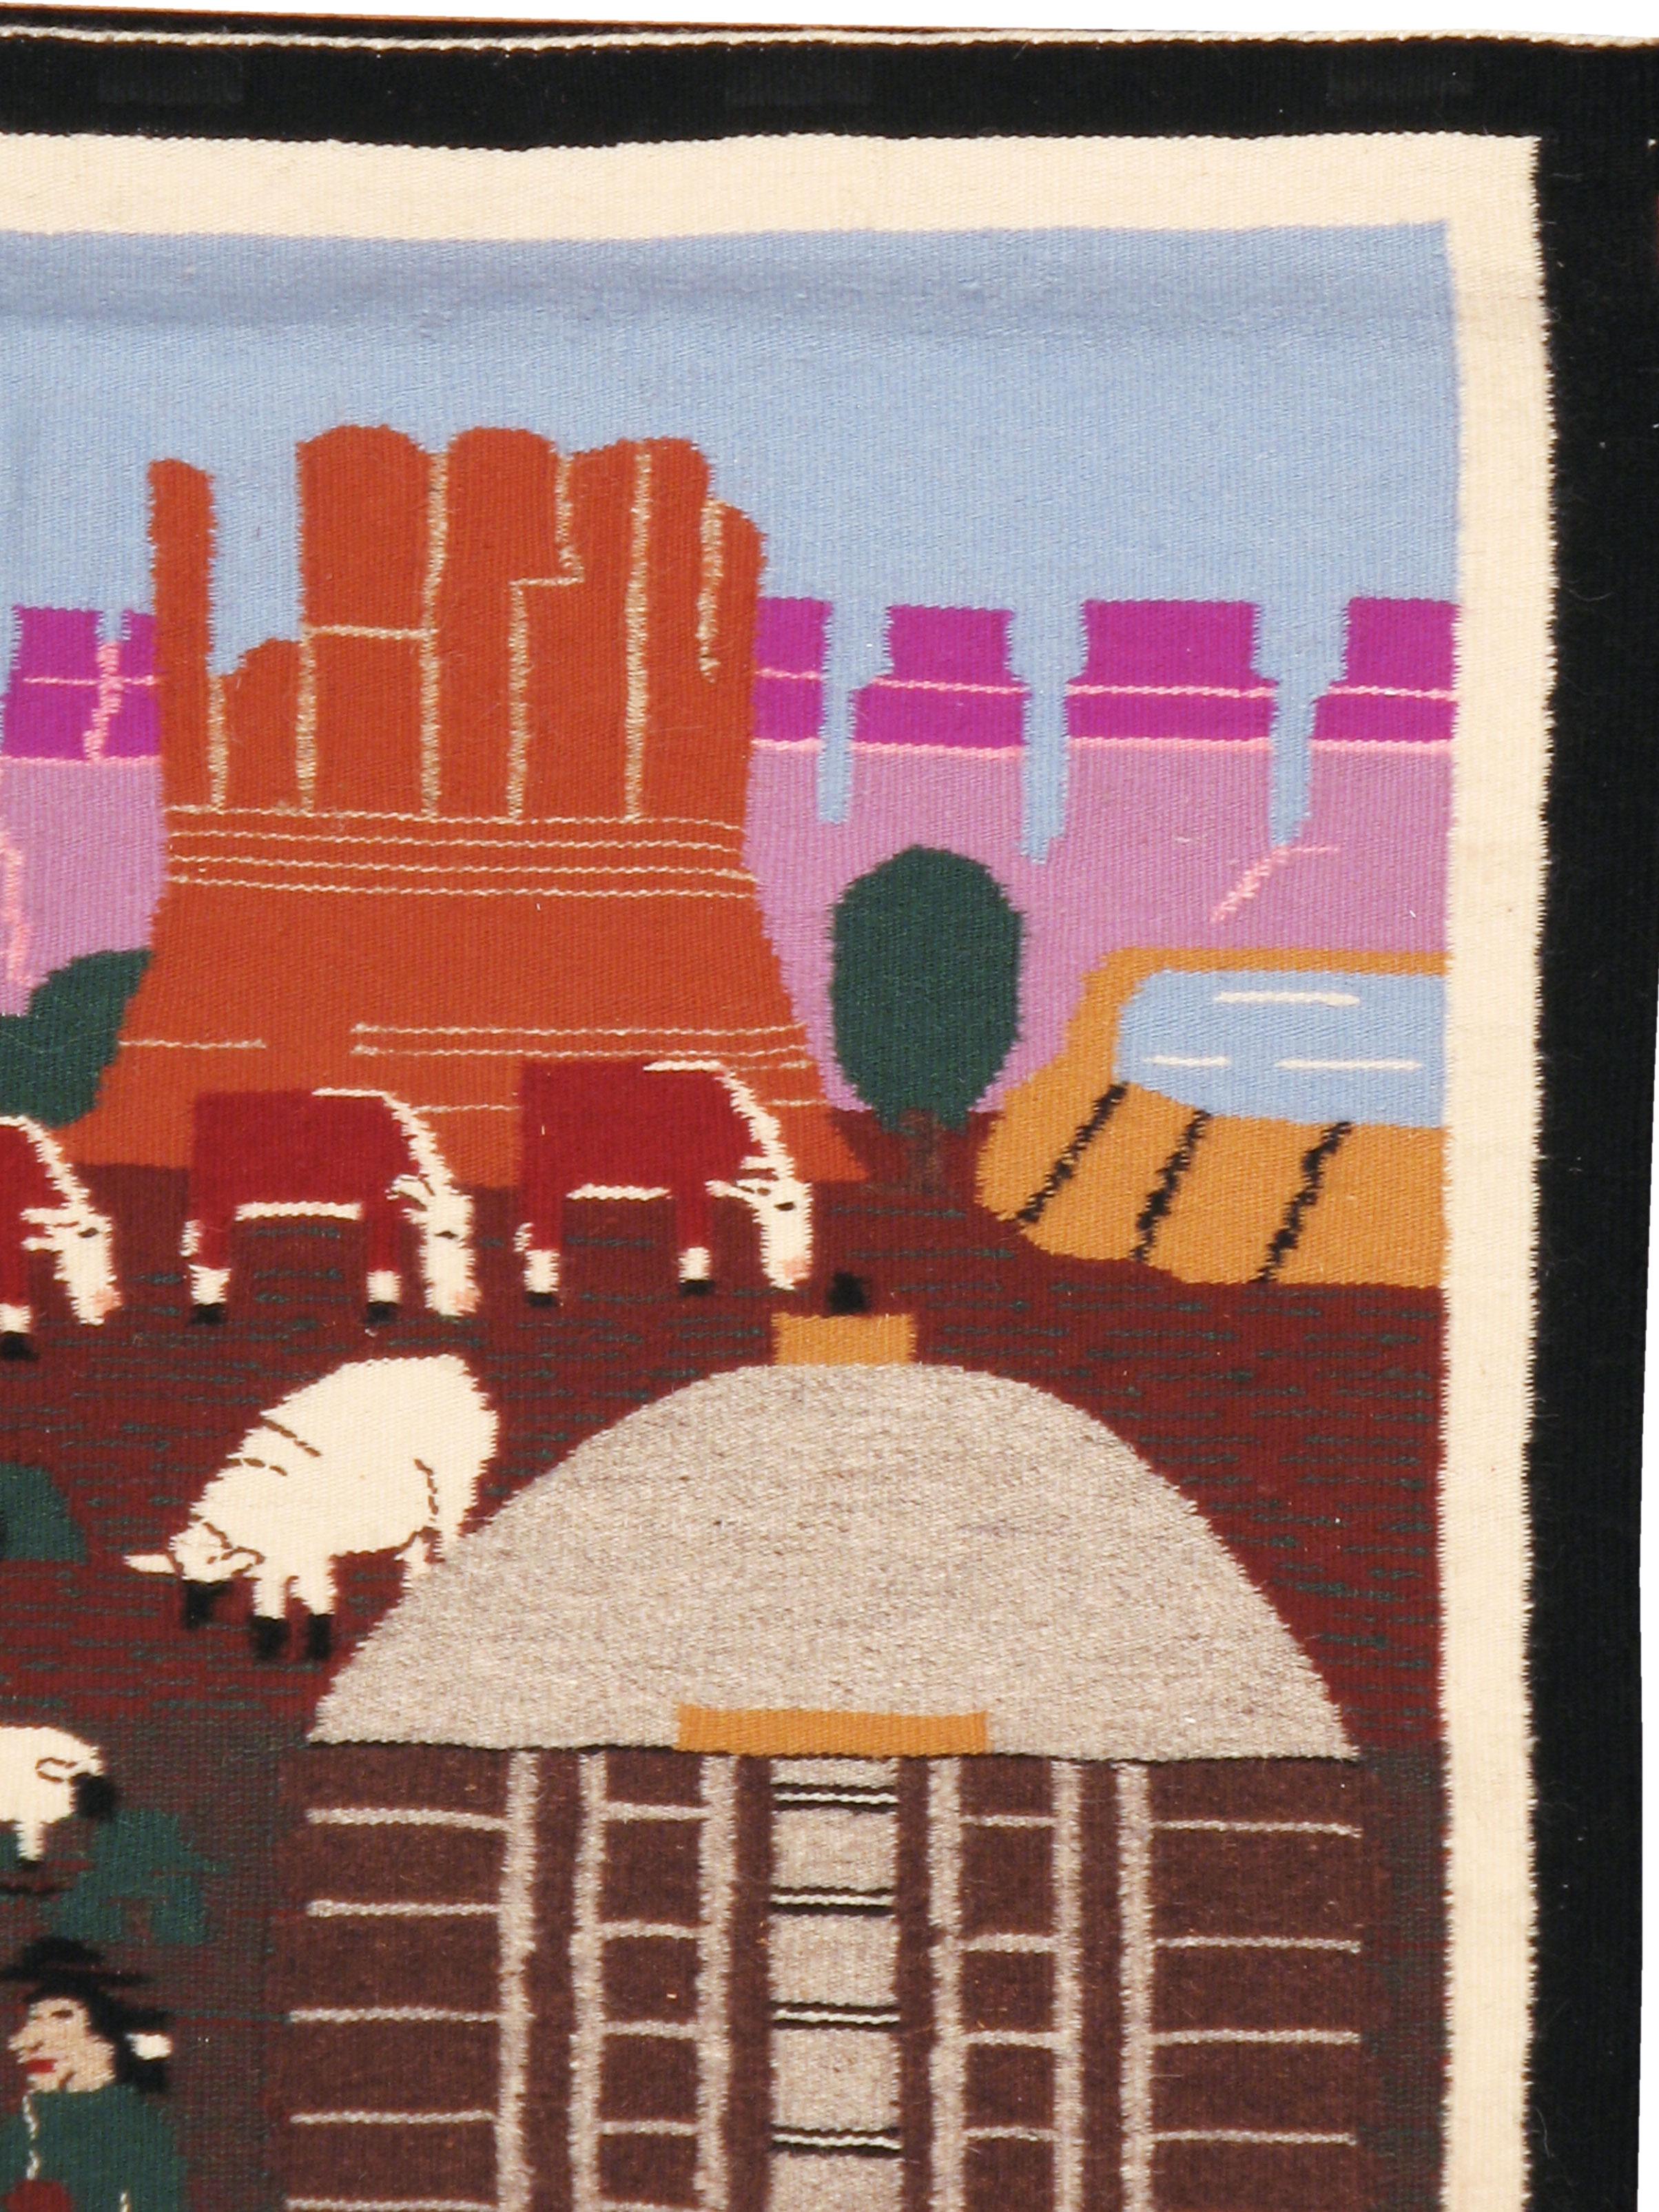 A vintage Pictorial rug handmade by the indigenous Navajo people of North America. Buttes and mesas tower in the background while a partly completed Navajo rug appears on a vertical loom along with its weaver, while other Navajo people, sheep, and